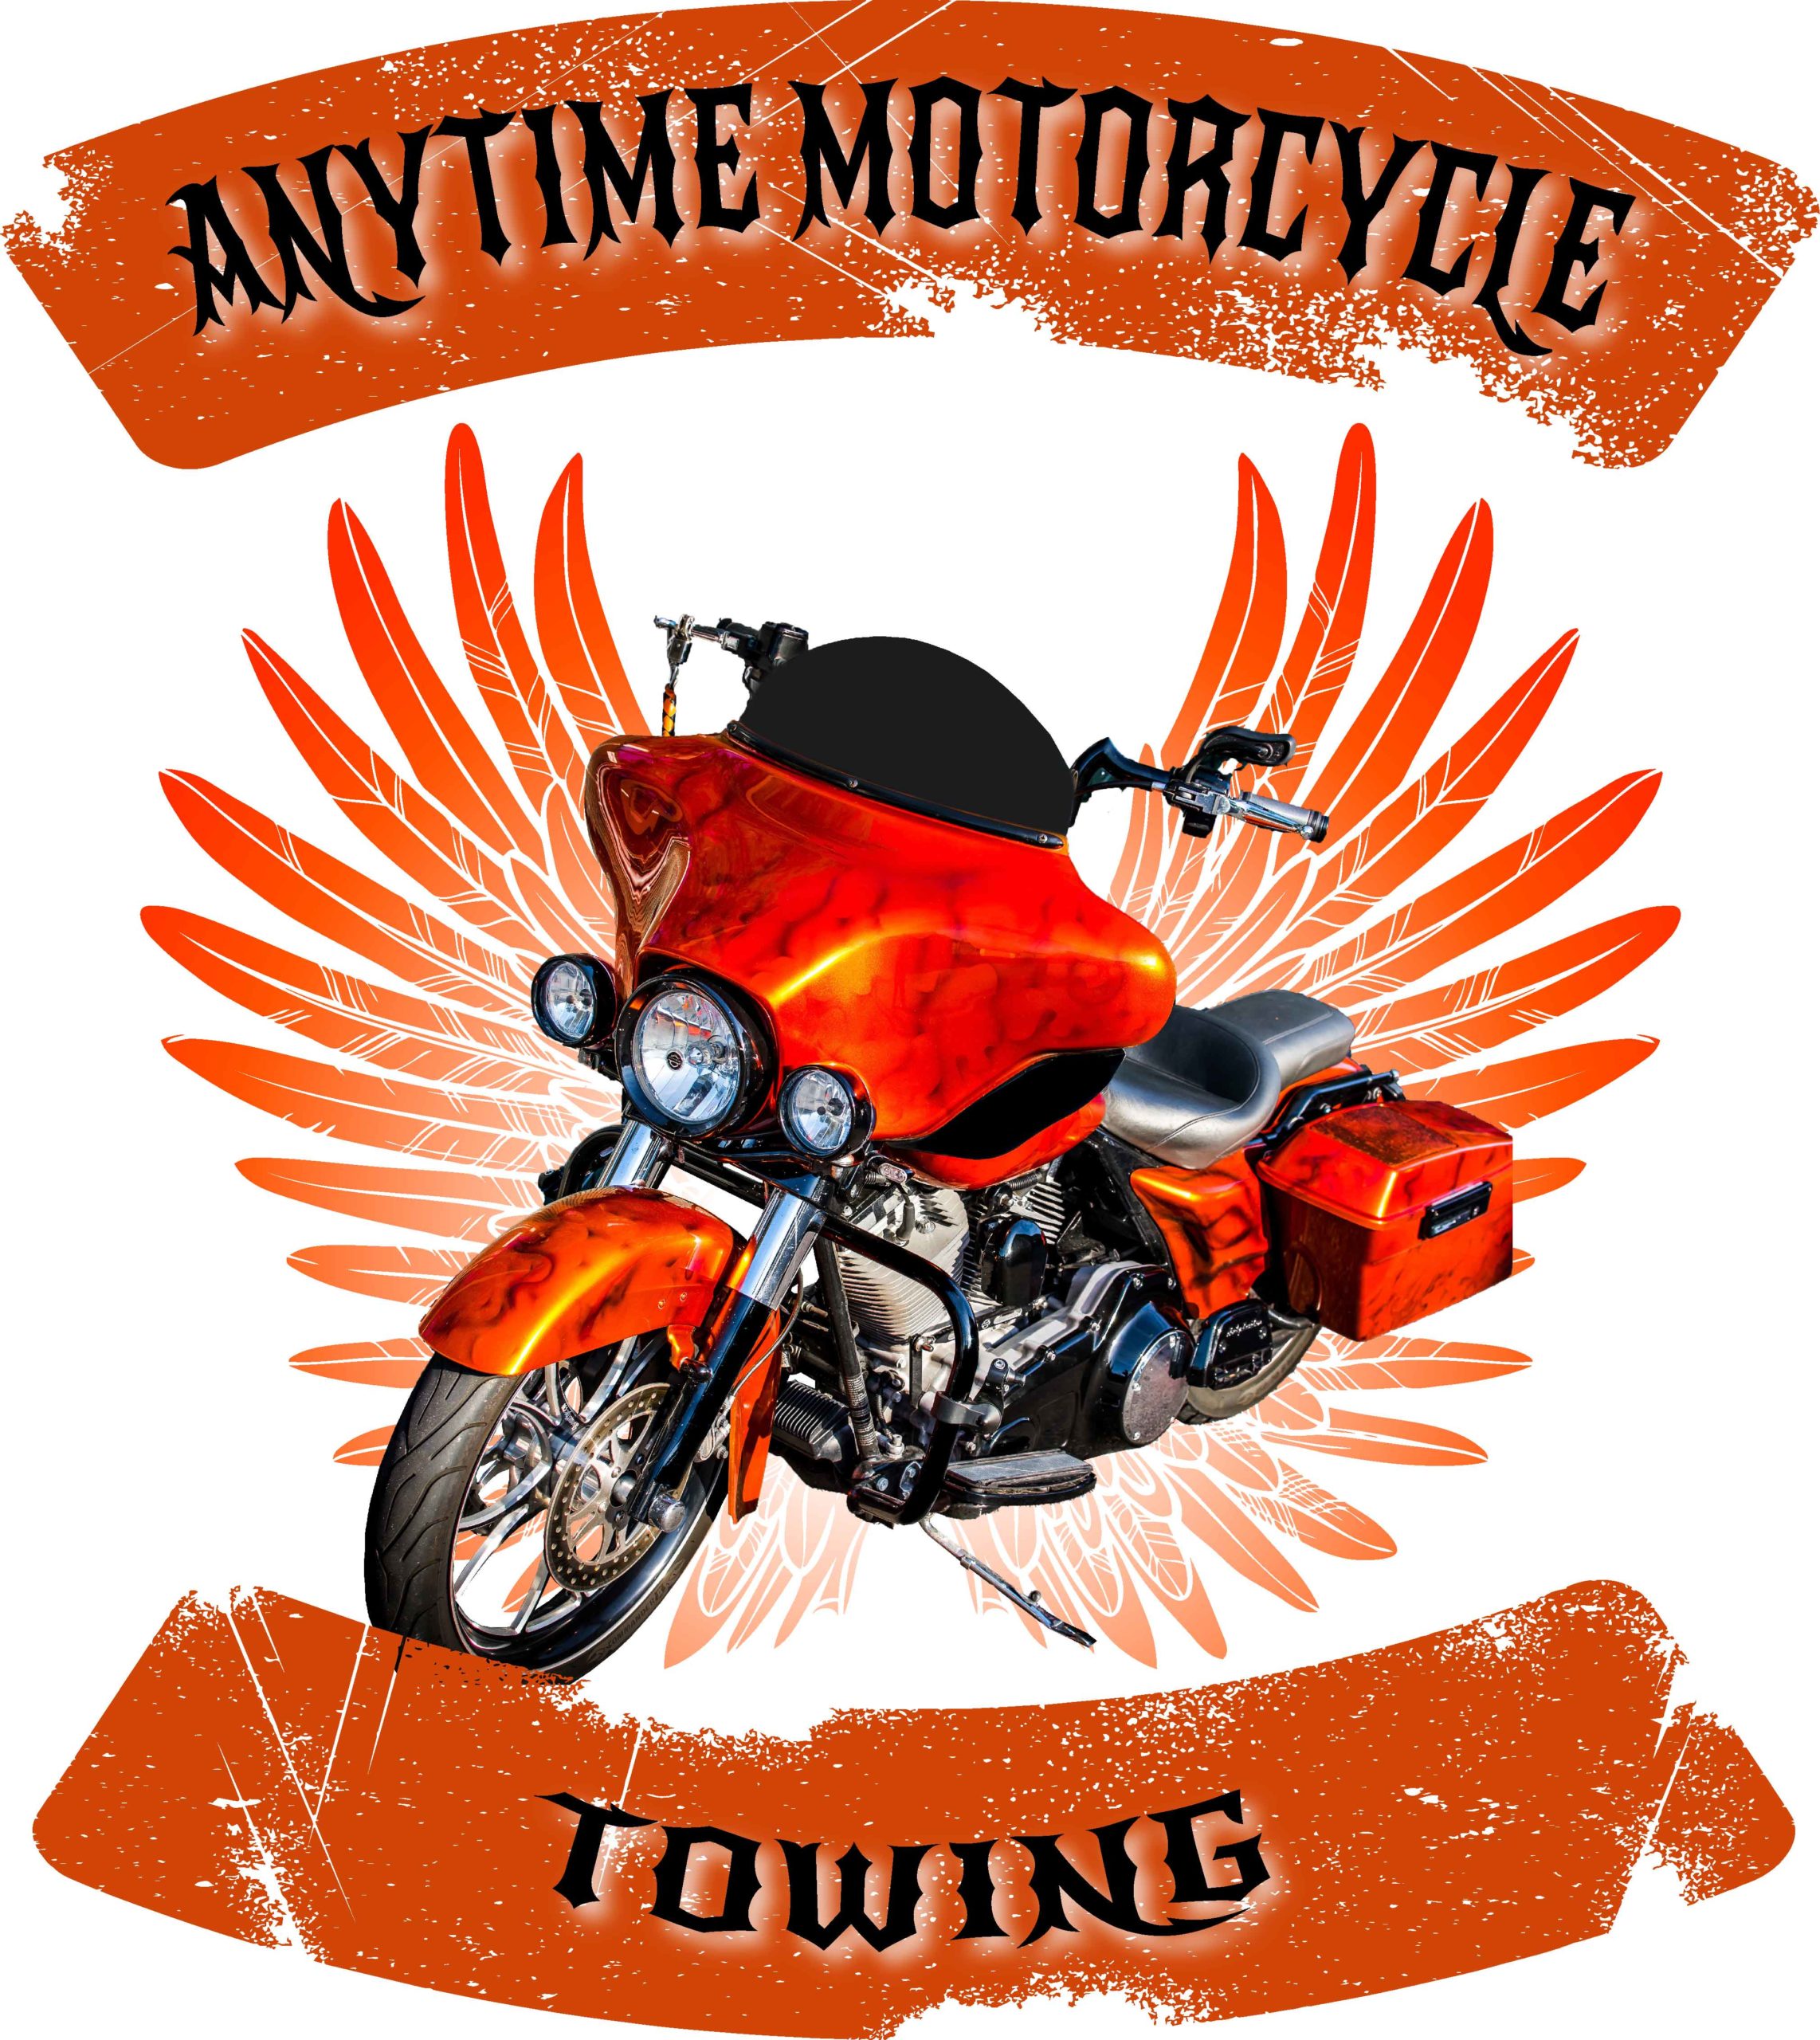 AD – Anytime Motorcycle Towing